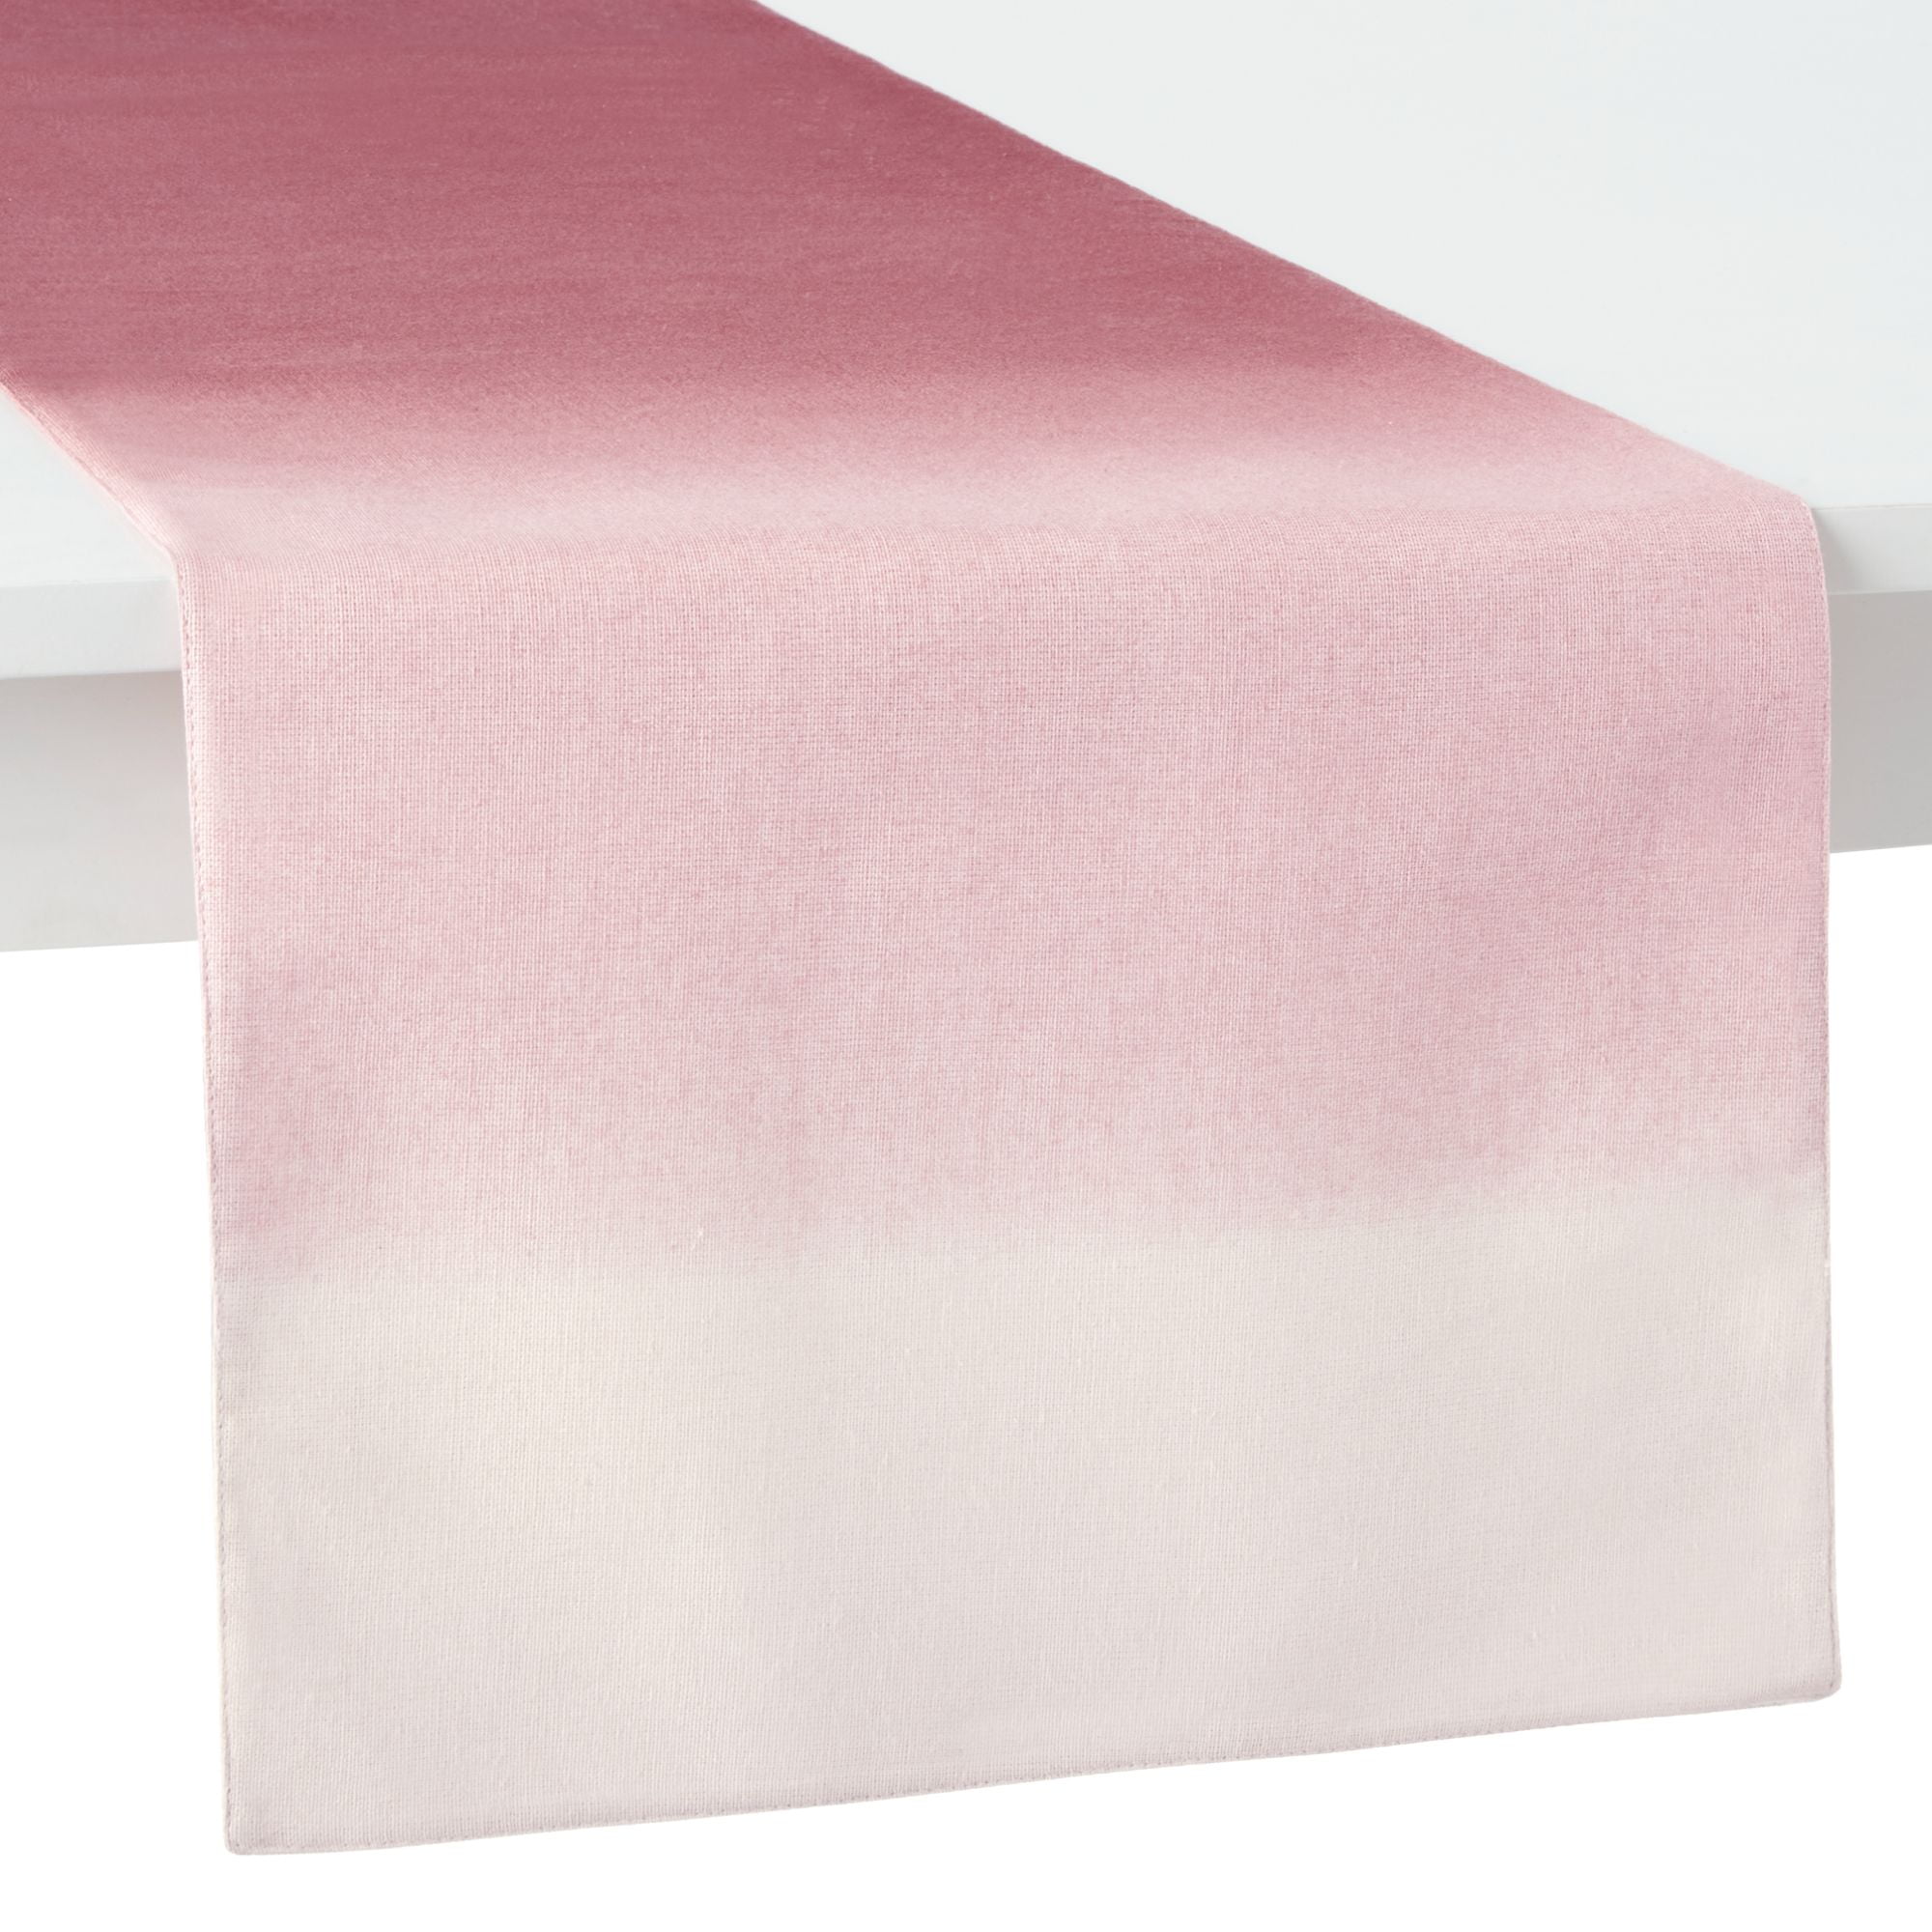 WC-WAY TO CELEBRATE Way To Celebrate Ombre Table Runner, 1 Piece